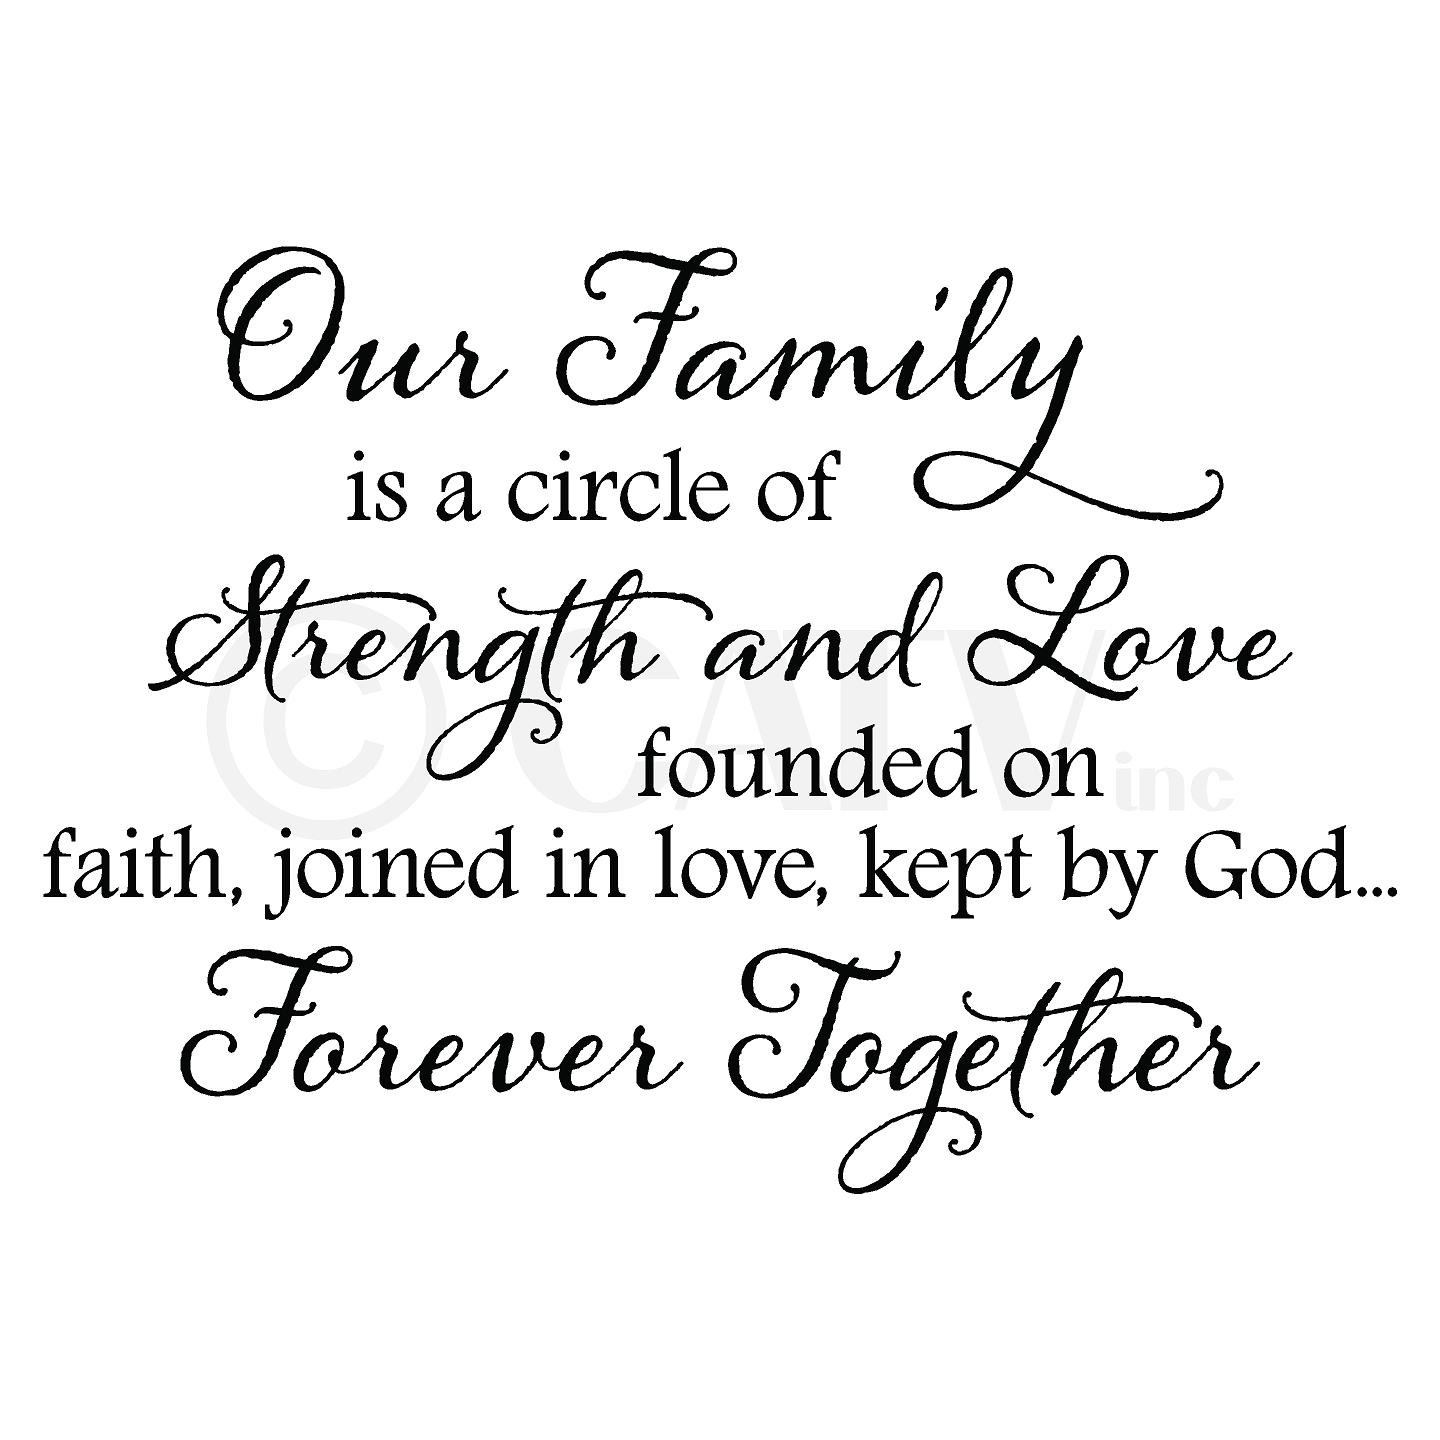 Our Family a Circle of Strength and Love Founded on Faith | Etsy